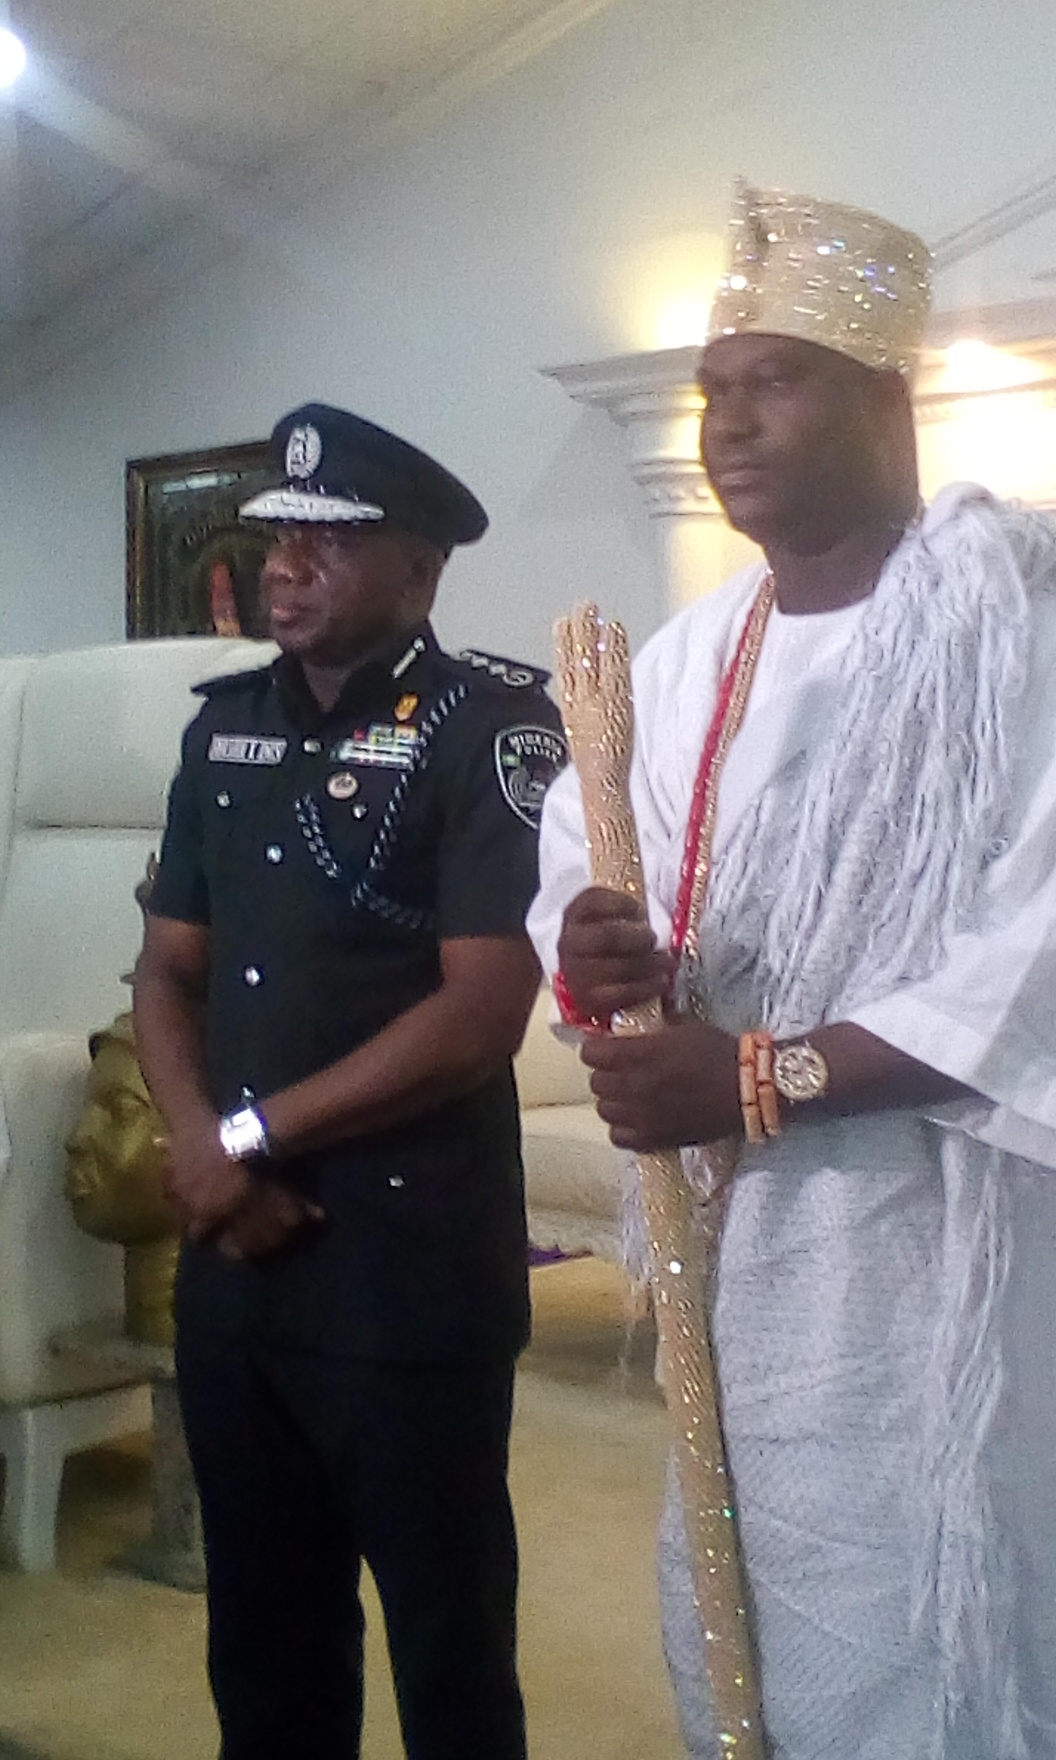 IGP Idris Visits Ooni To Ensure Bloodshed Free Elections